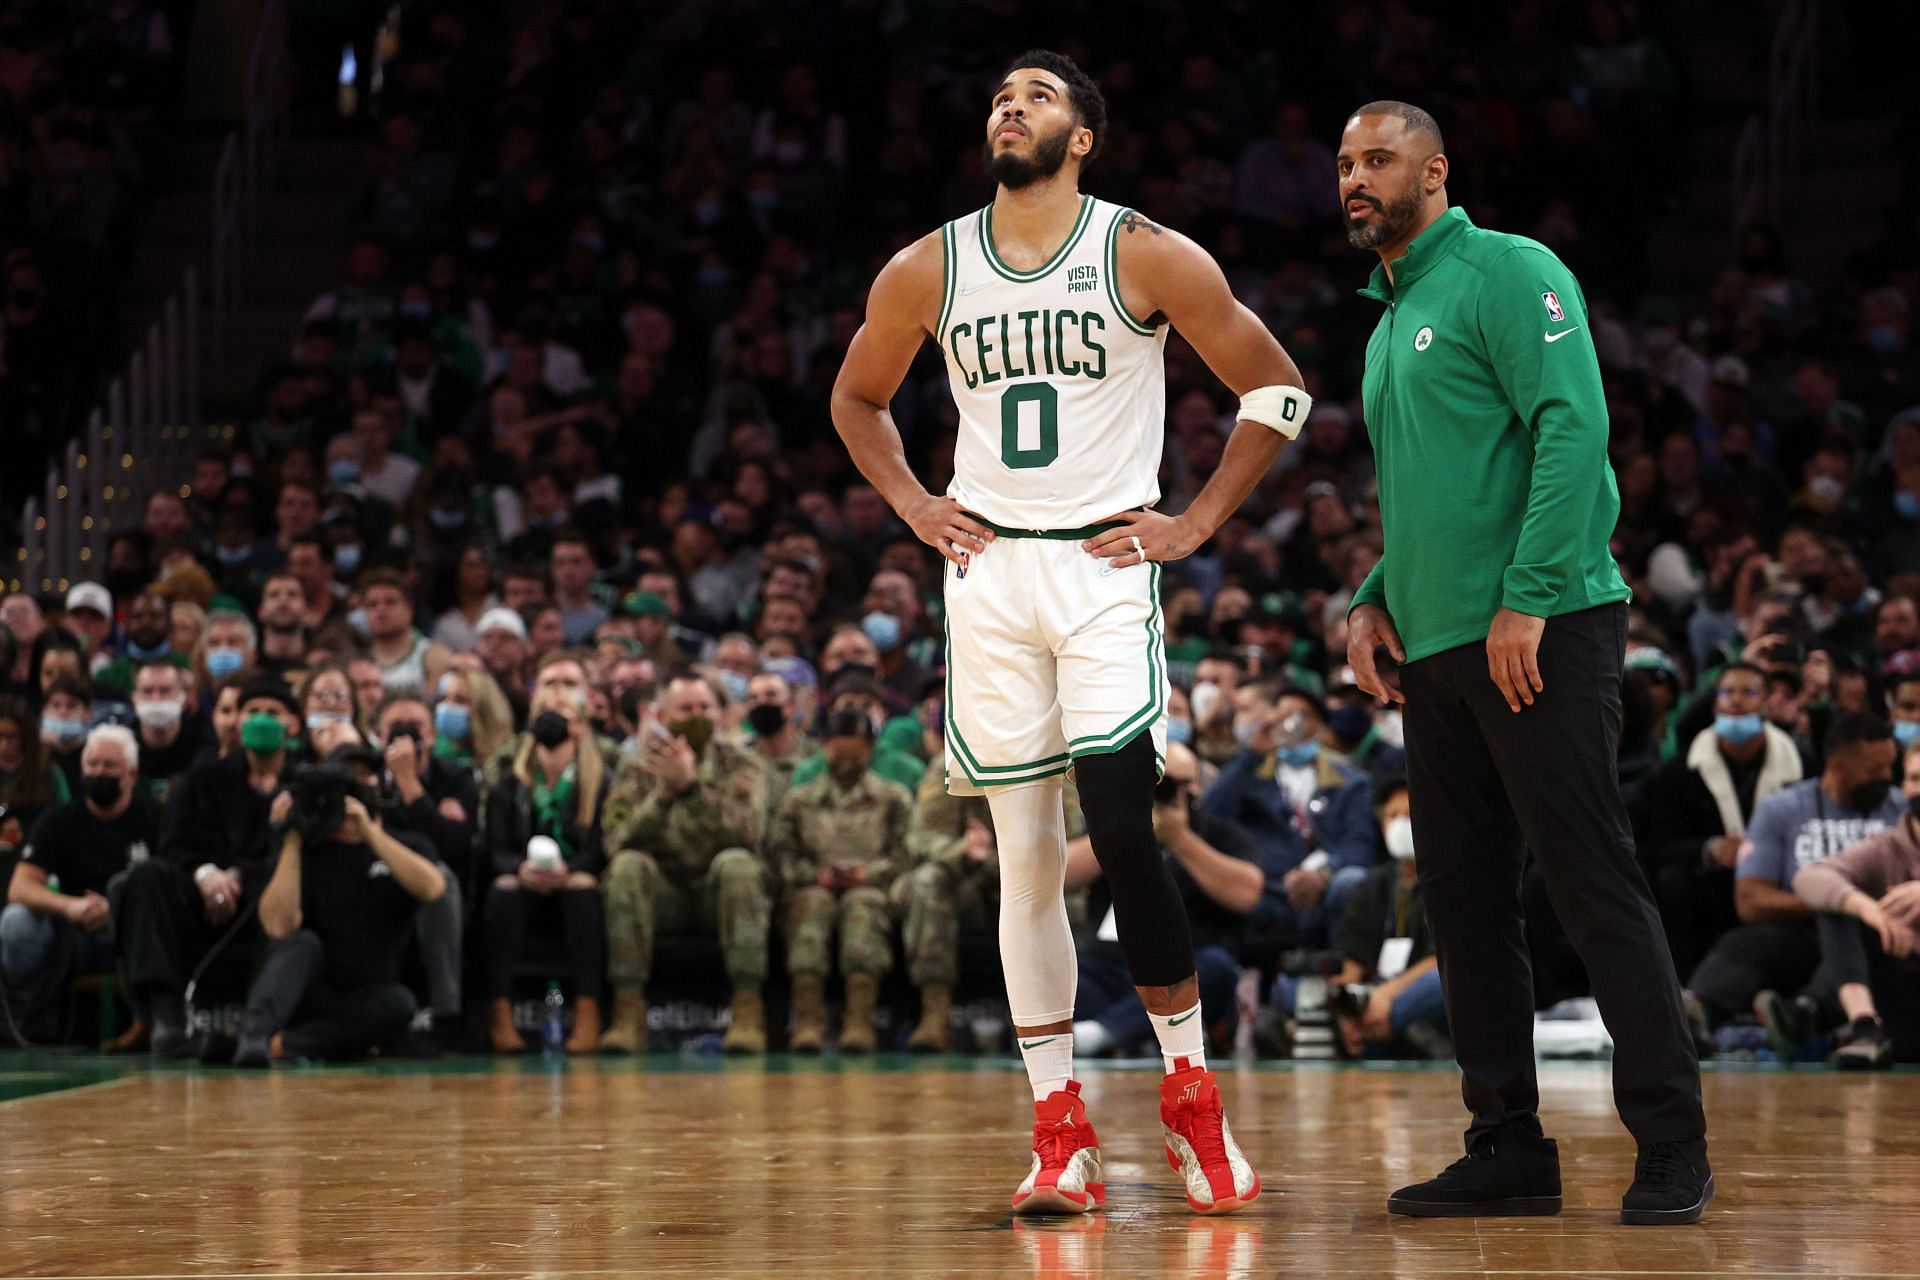 Jayson Tatum has been unfazed by the defense of opposing teams without Jaylen Brown to share the scoring load with him.